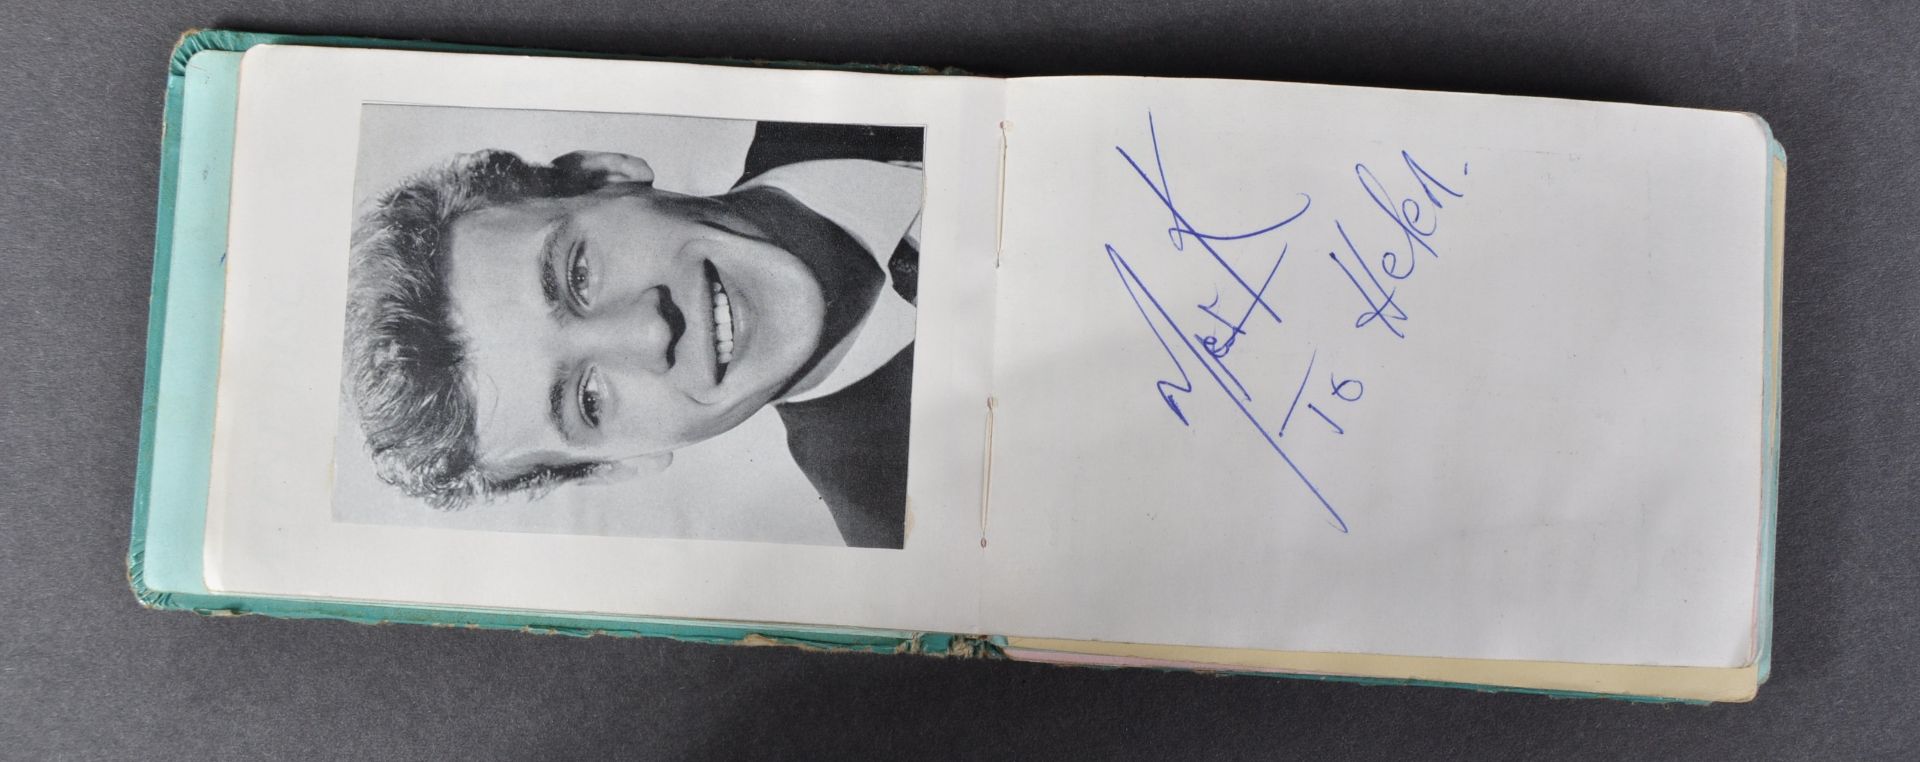 1960S MUSIC AUTOGRAPH ALBUMS - OBTAINED FROM DISCS-A-GOGO - Image 8 of 31